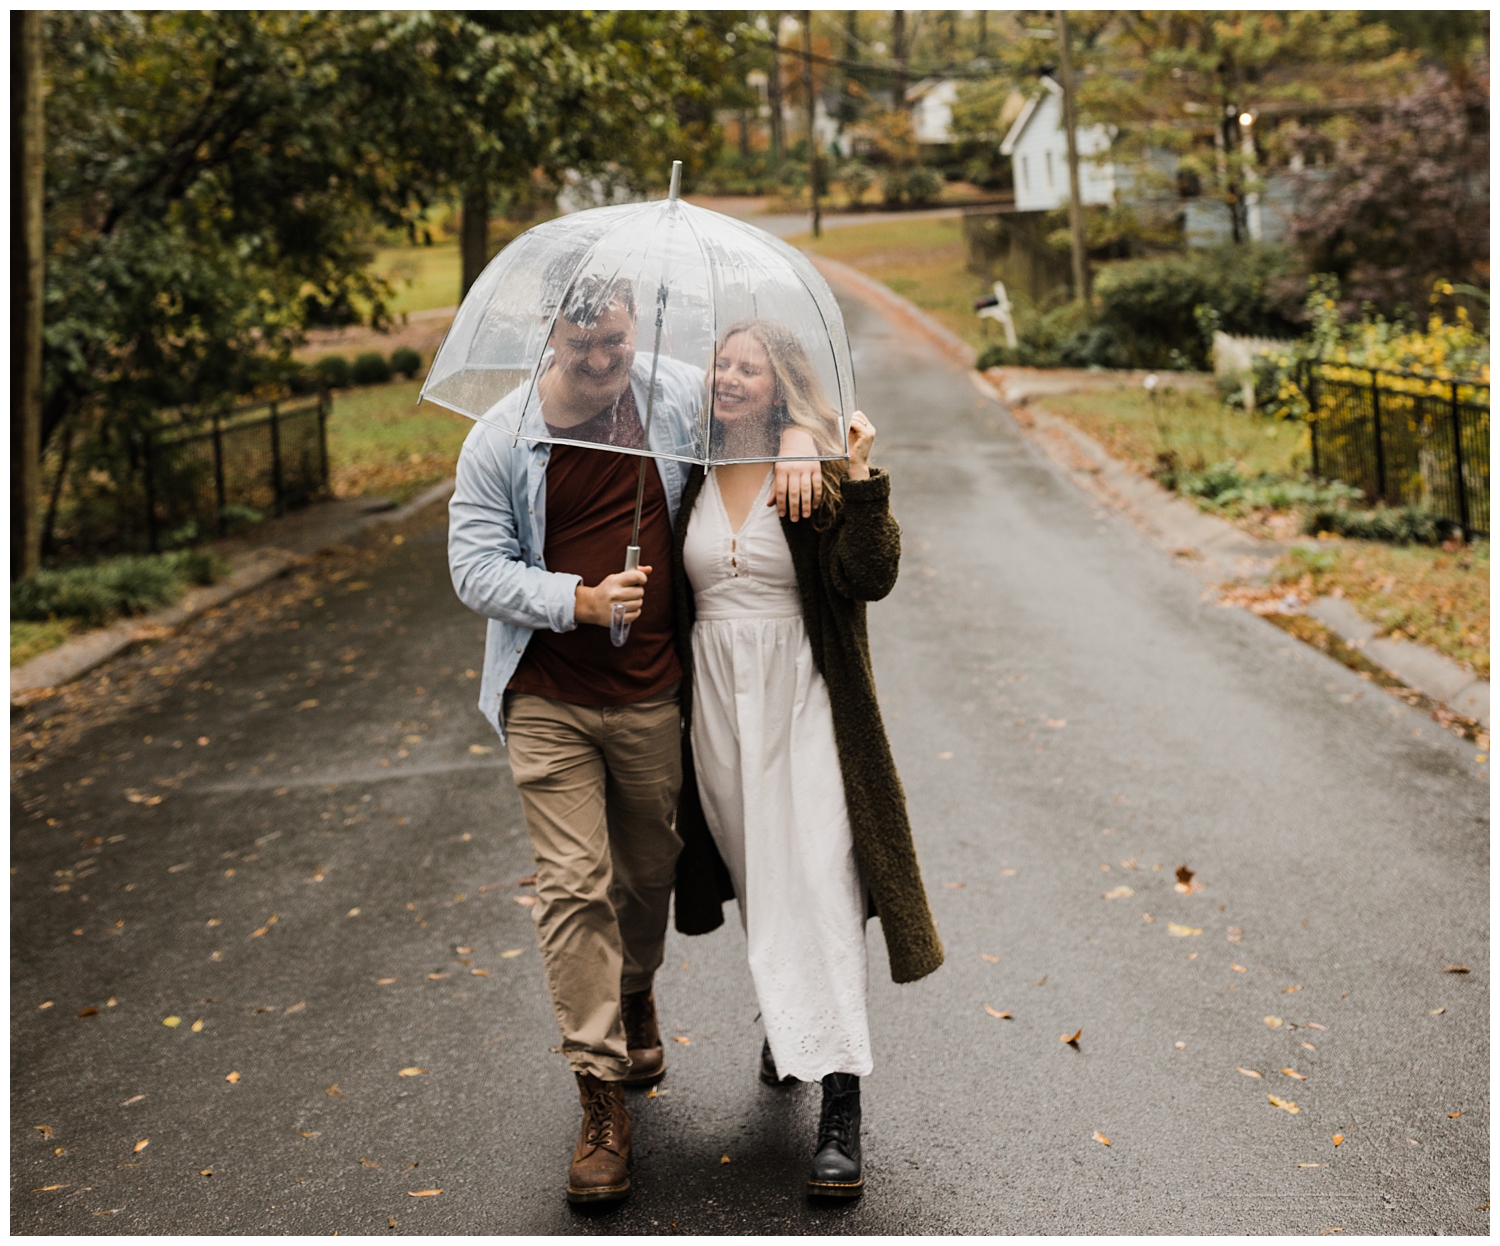 Rainy Day Engagement Session in Marietta, Georgia with cute couple laughing in the rain walking down the street